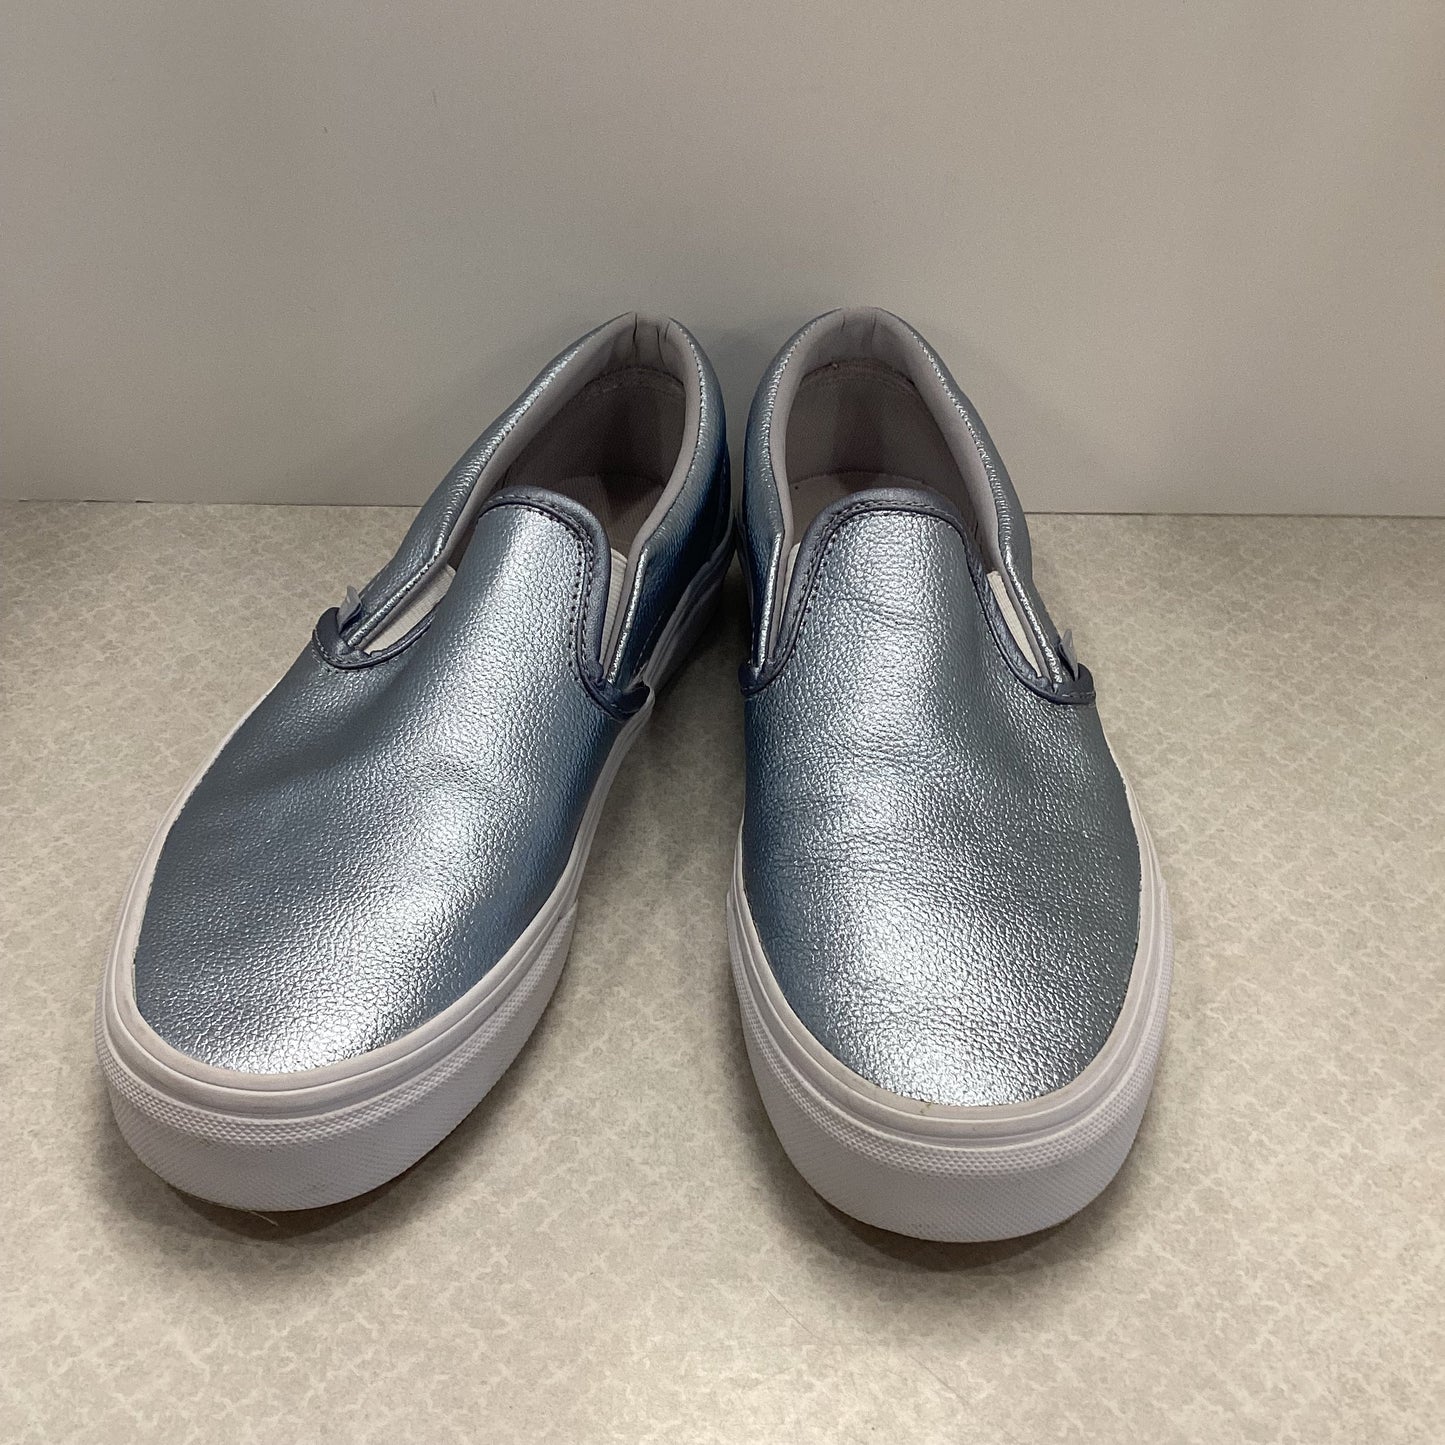 Silver Shoes Sneakers Vans, Size 8.5